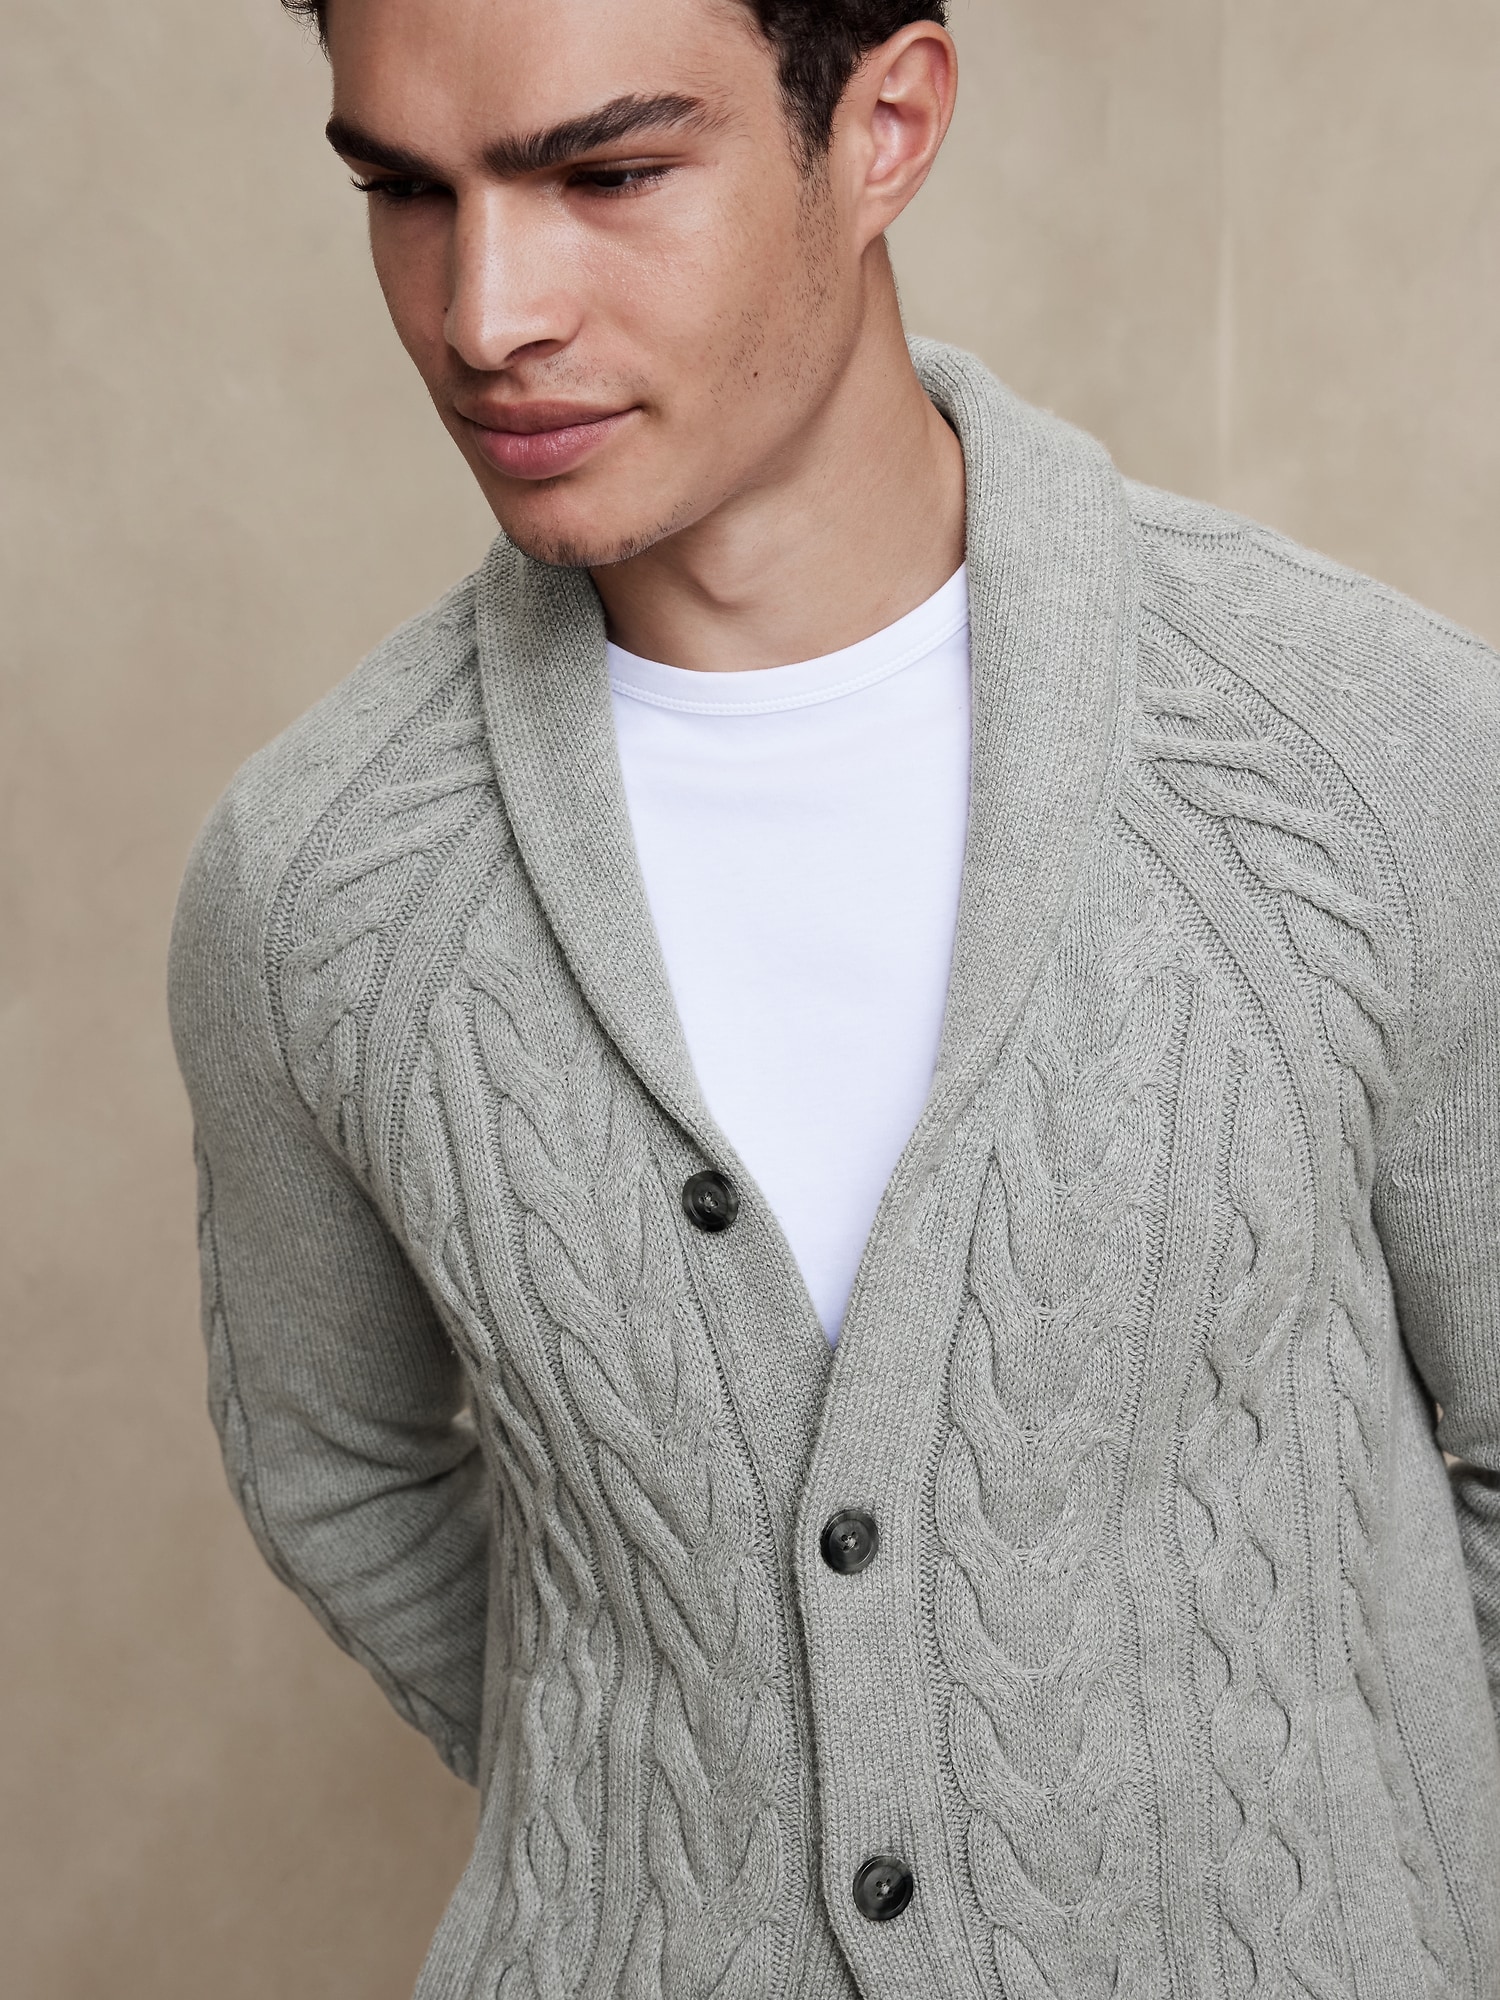 Men's Cardigan Sweater the Palmer Cardigan Sweater by Fisher + Baker